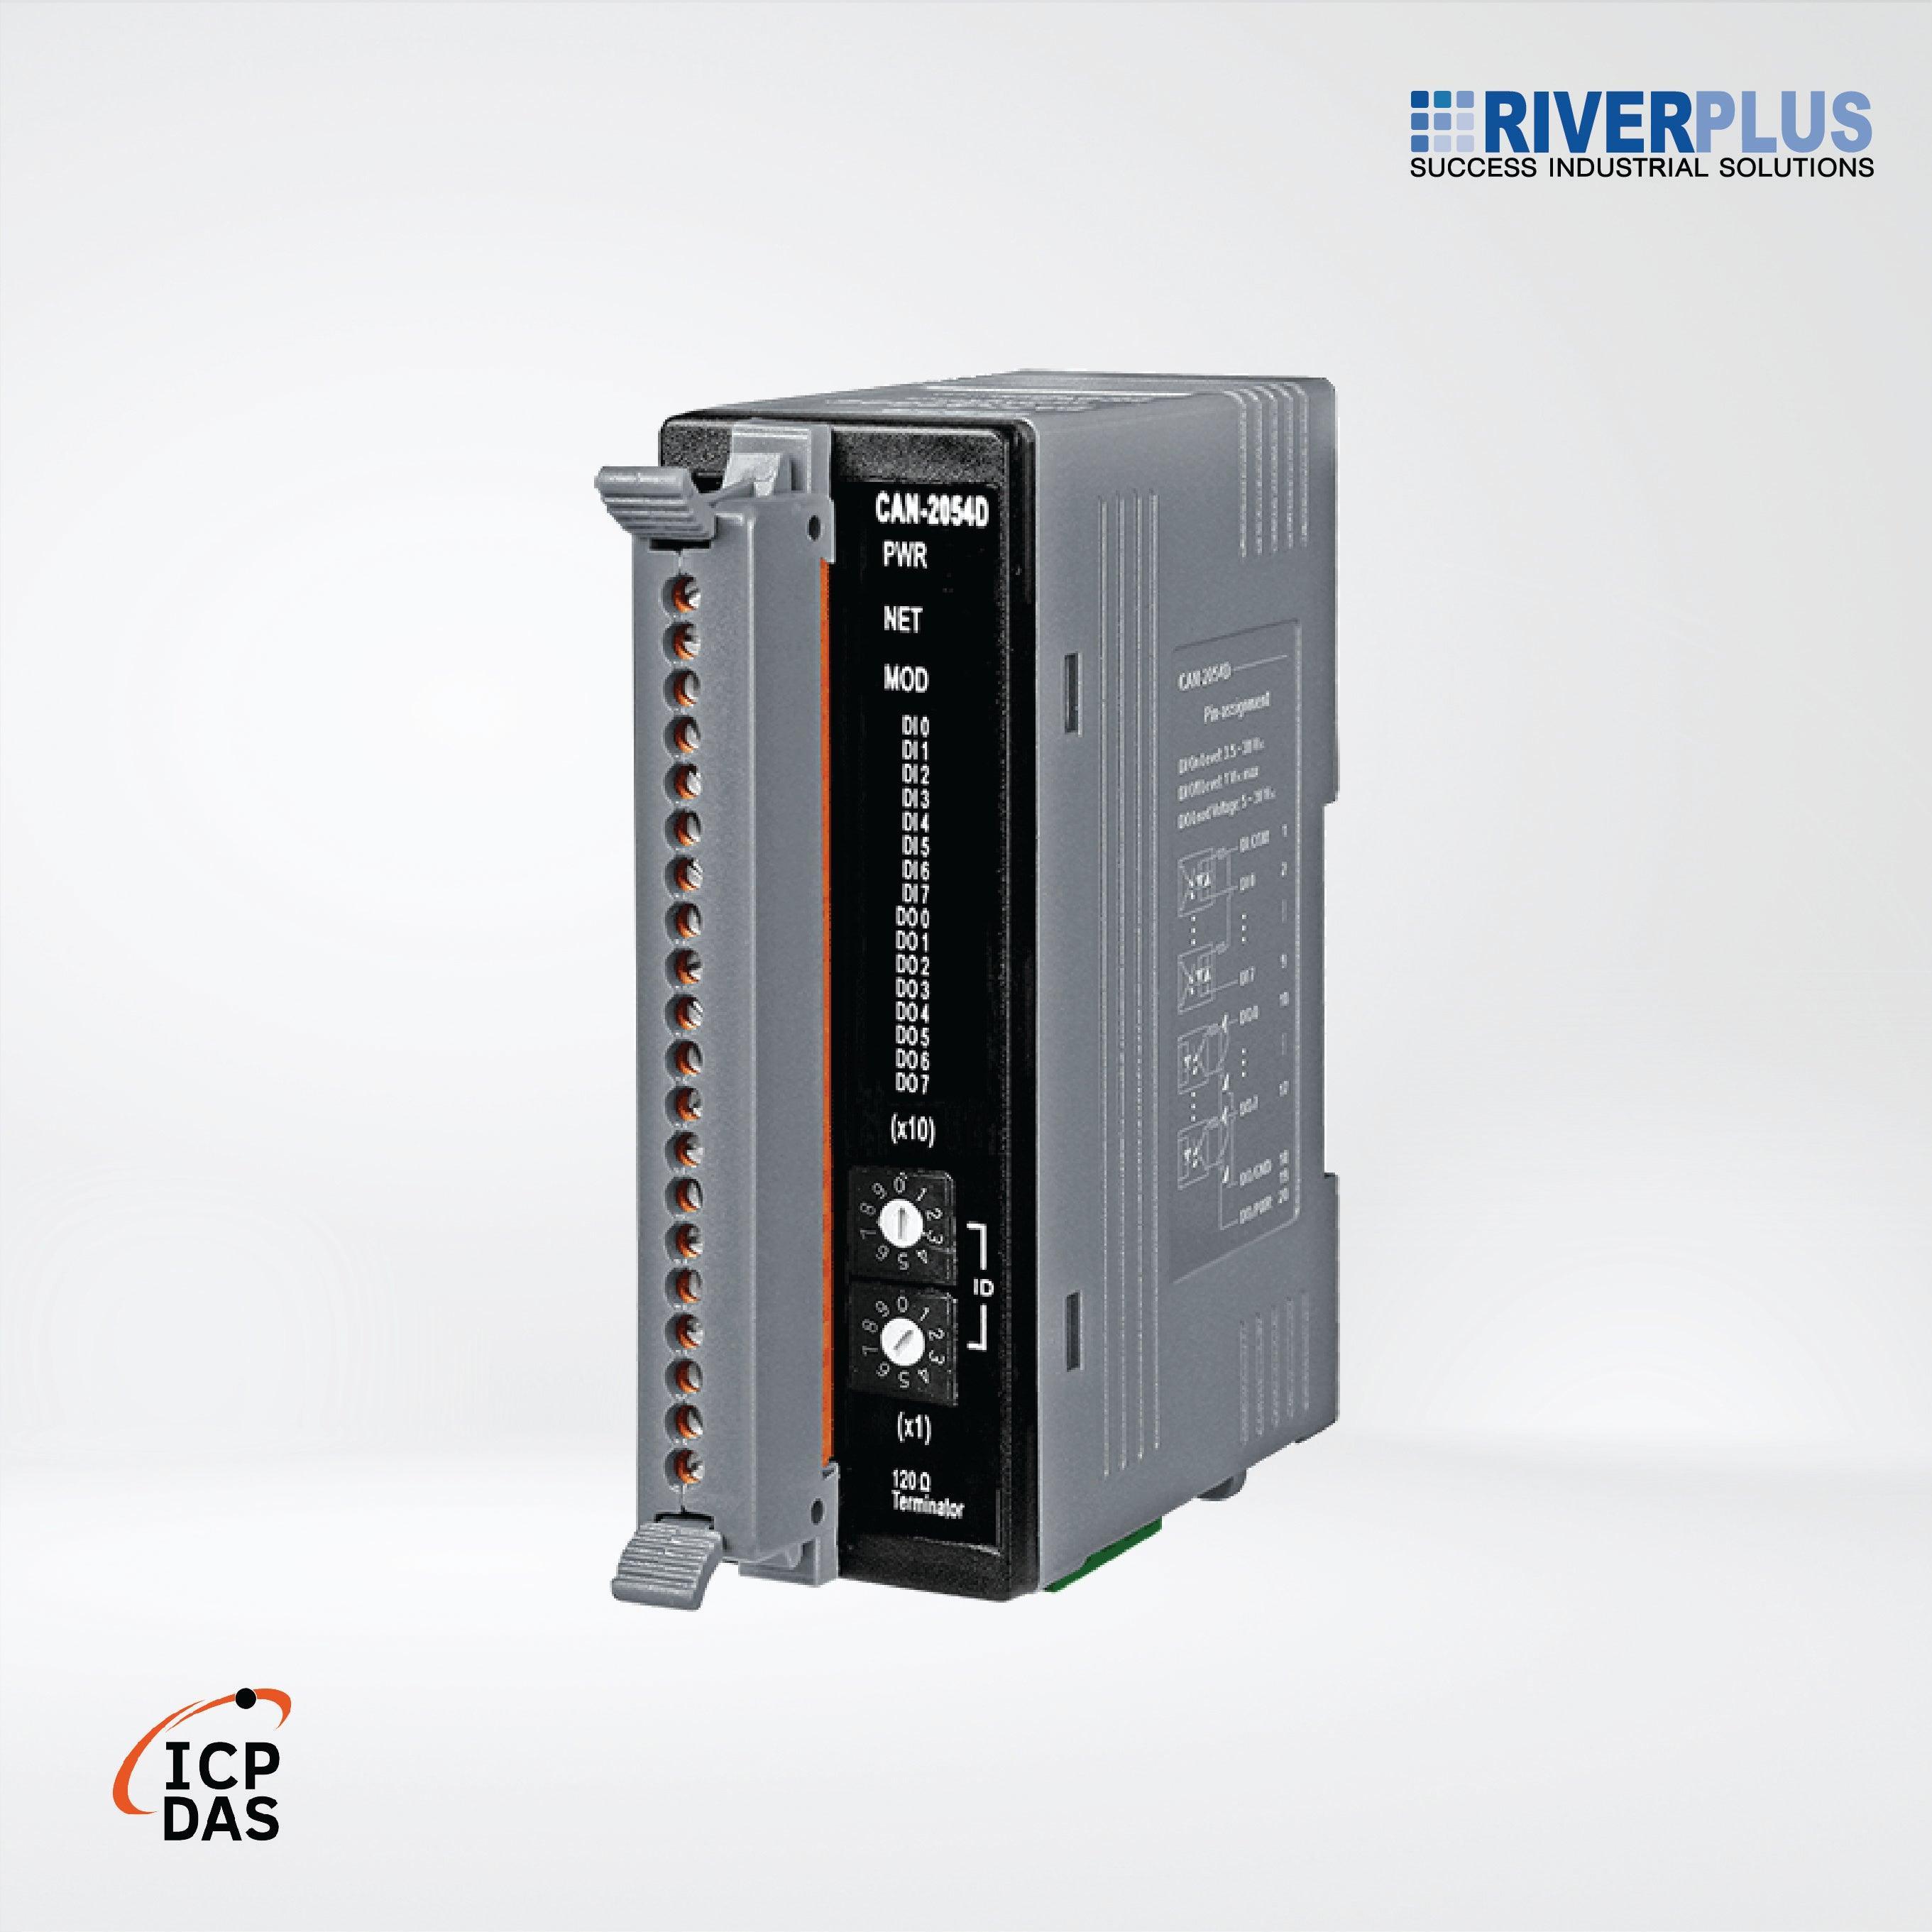 CAN-2054D DeviceNet Slave Module of 8-channel Isolated (Wet) DI, 8-channel Isolated (Sink, NPN) DO - Riverplus